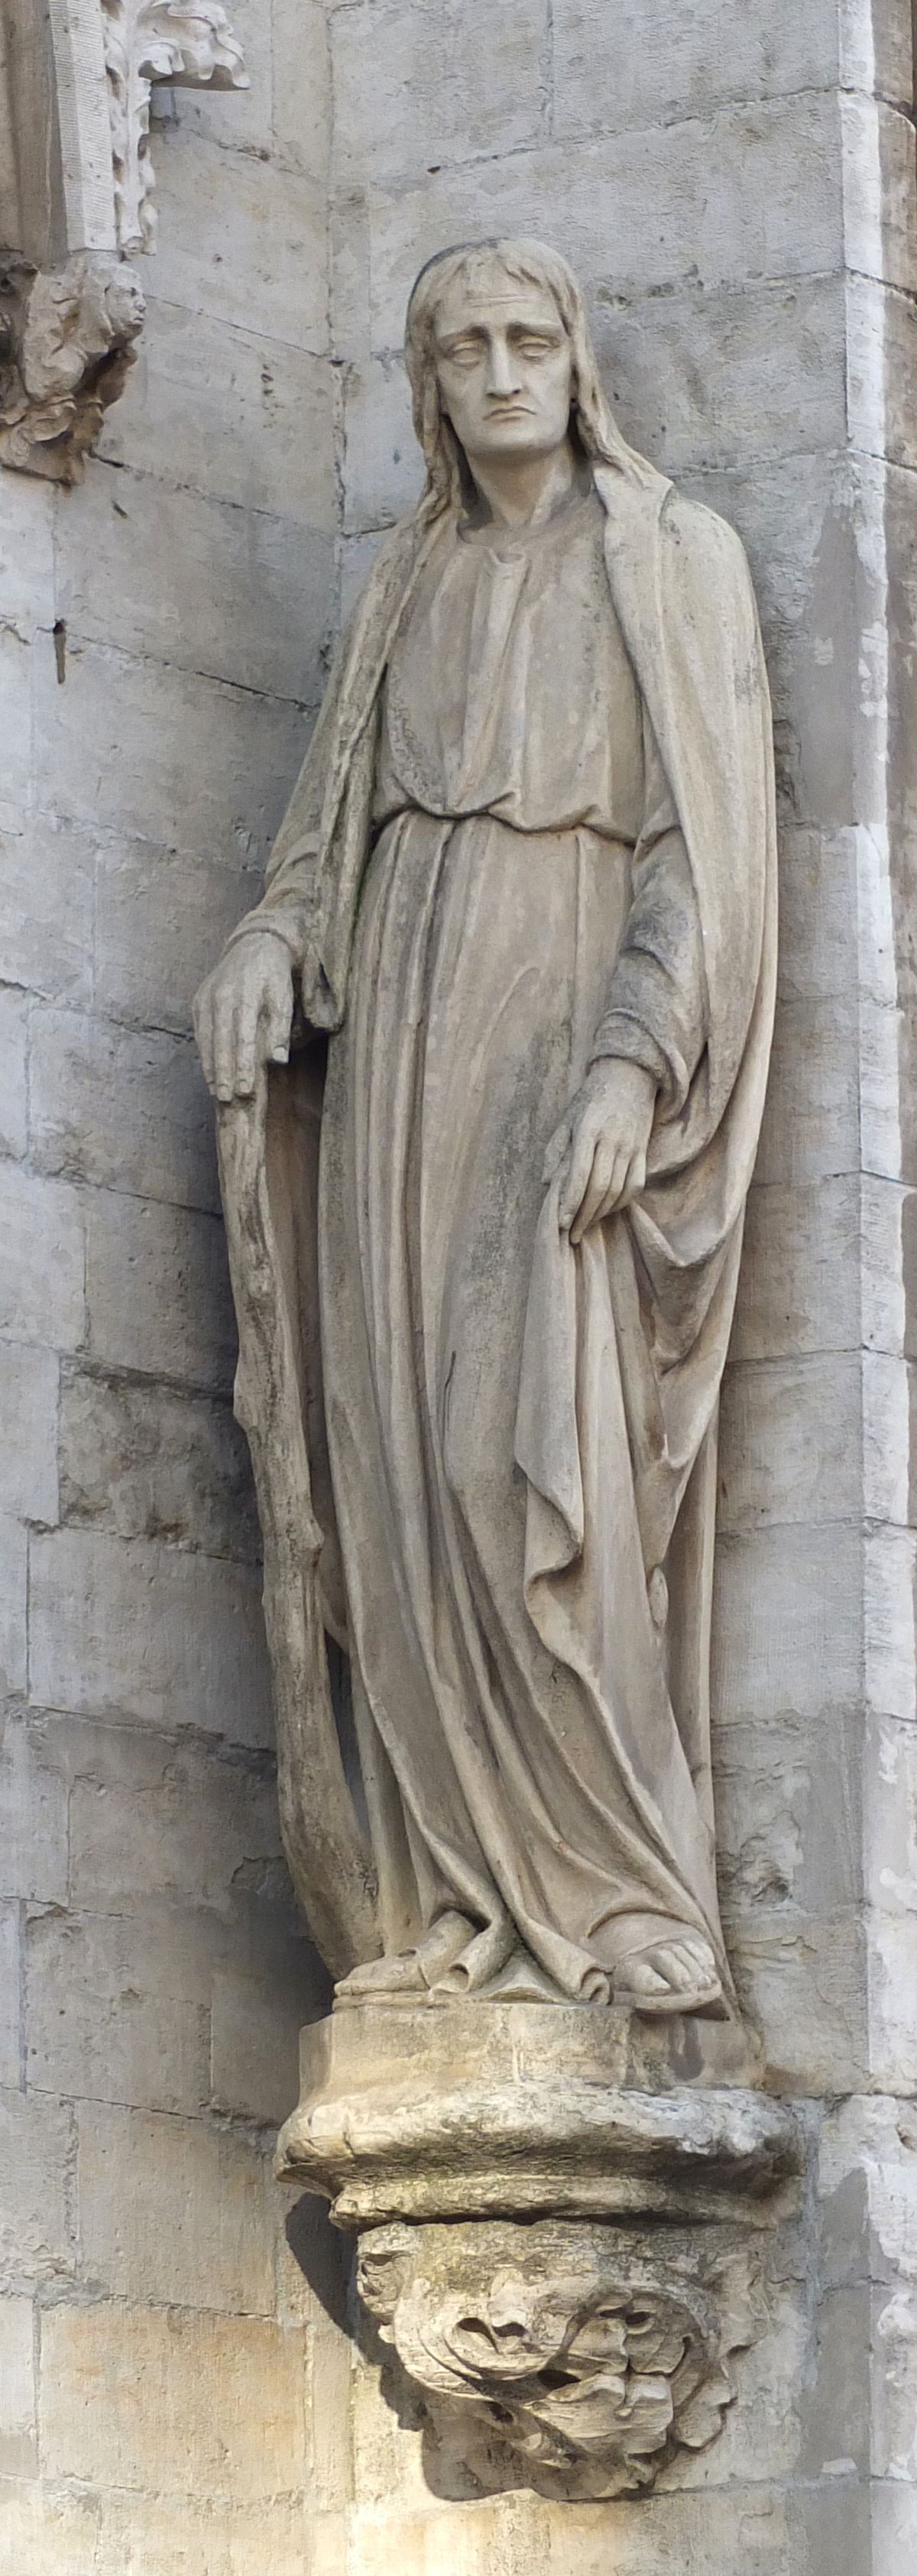 Statue of the Apostle James the Less on the facade of St George's Church in Antwerp (2015) by Ad Meskens - Catholic Stock Photo